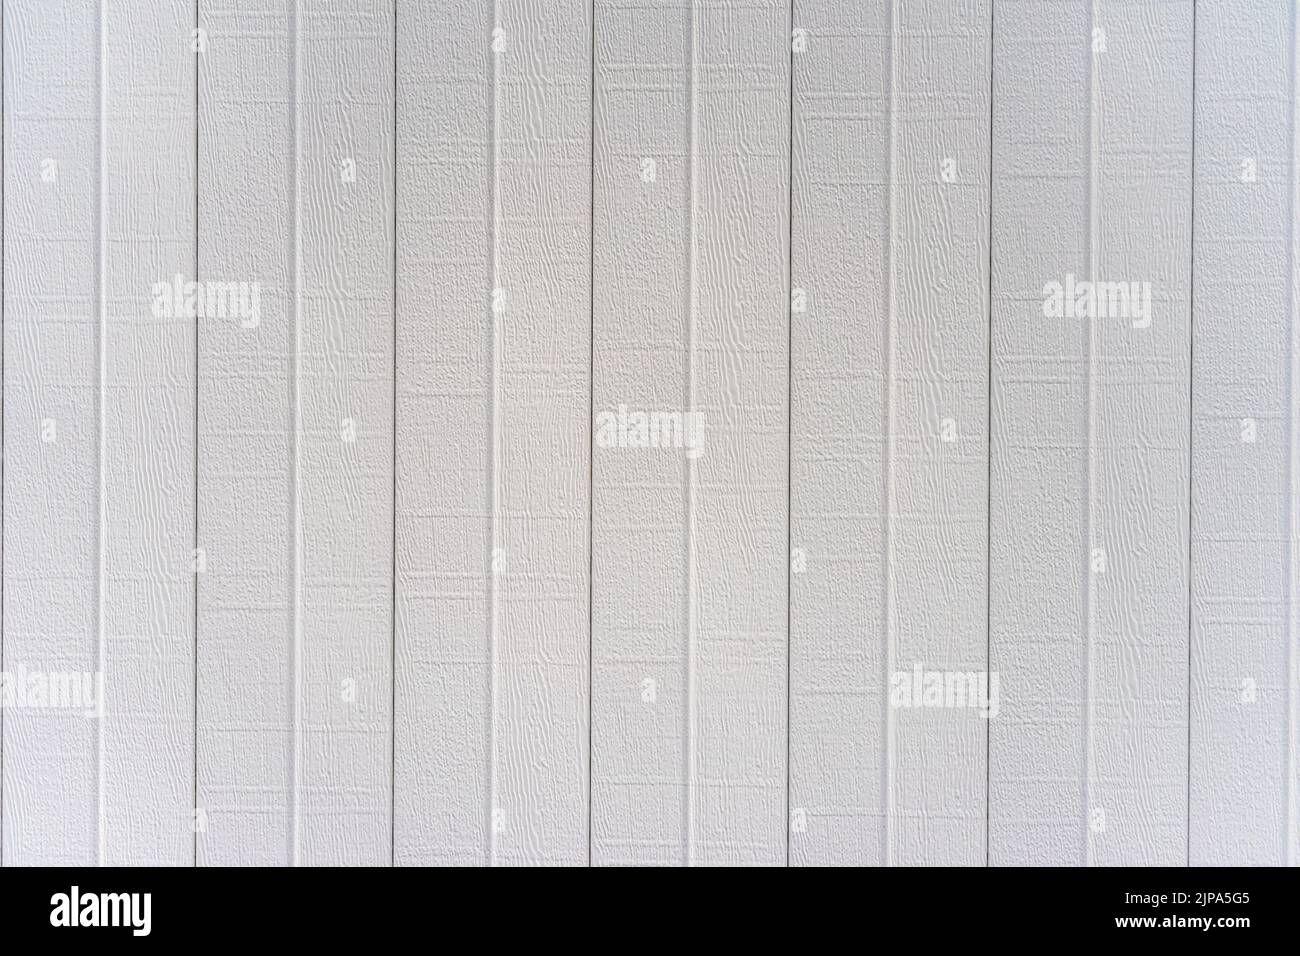 White aluminum patio cover finishing in a embossed faux wood grain texture Stock Photo